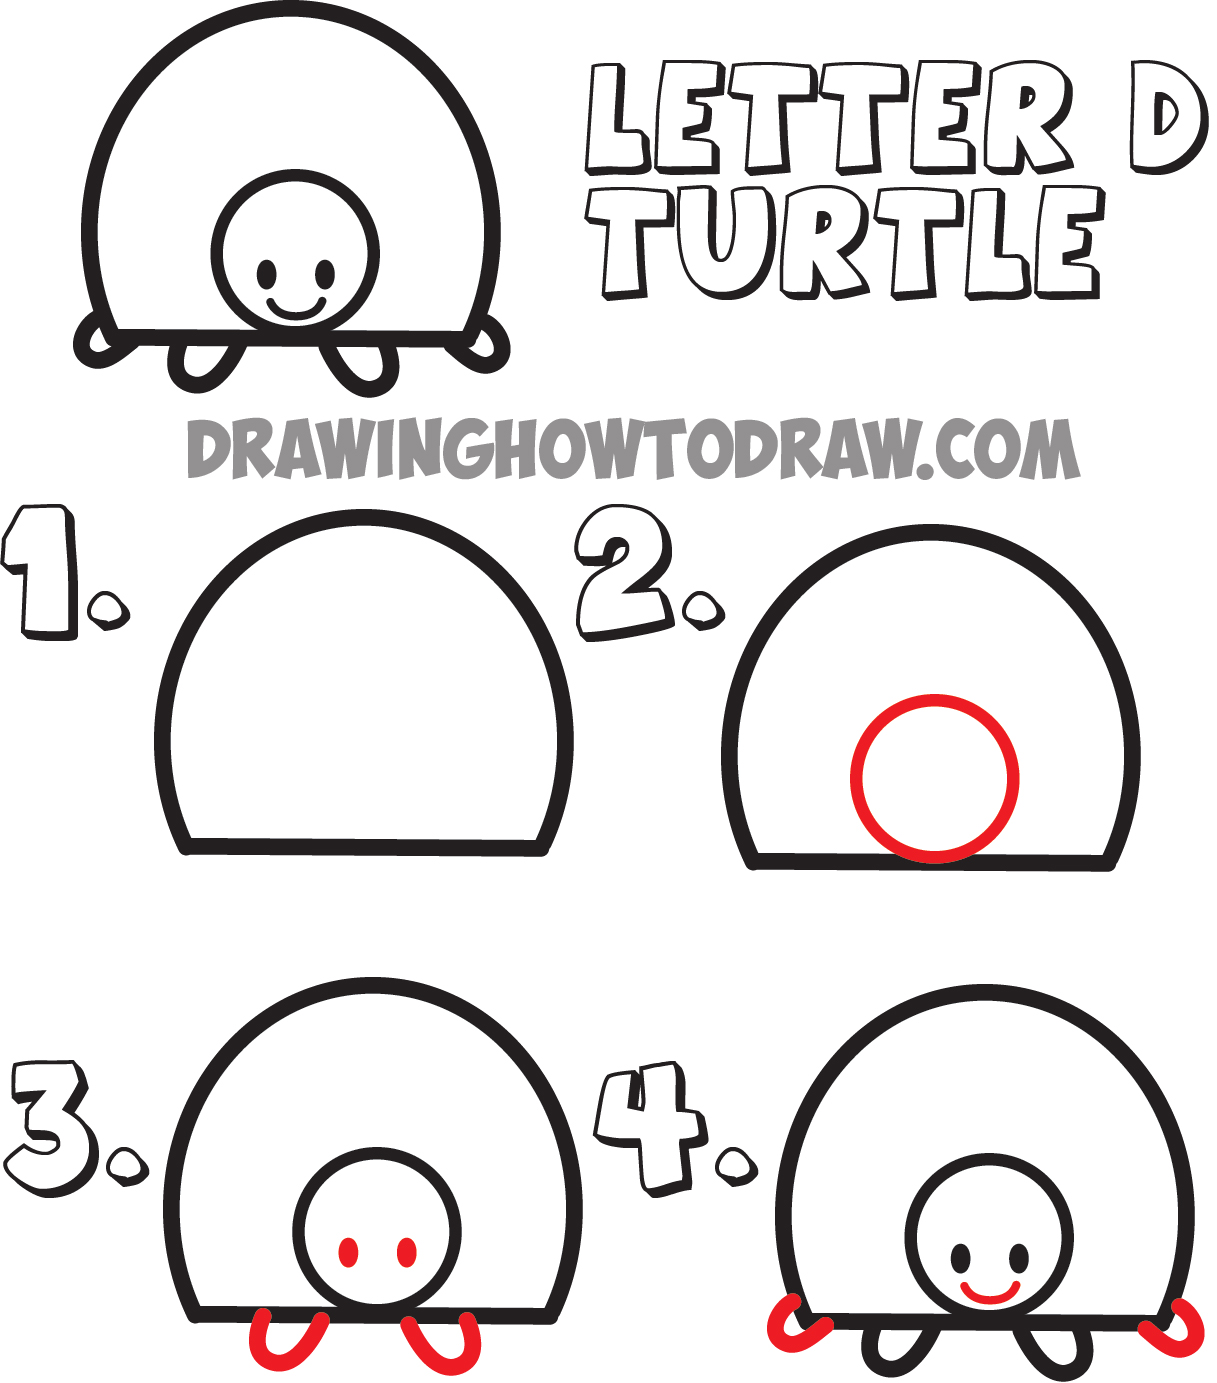 how to draw cartoon turtles from the uppercase letter D shape